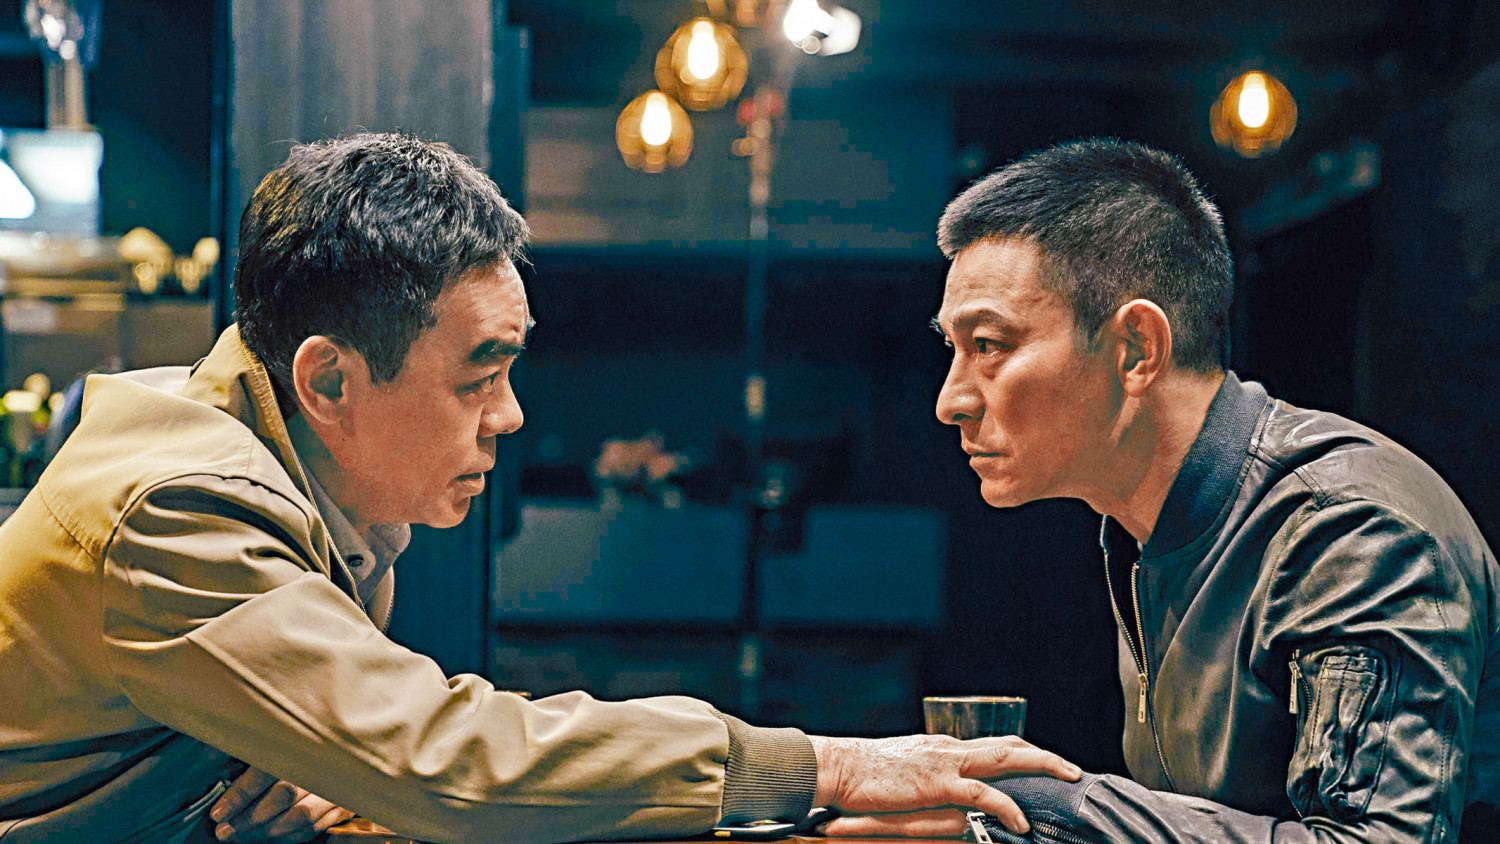 HKSAR Film No Top 10 Box Office [2021.07.03] SHOCK WAVE 2 IS THE TOP